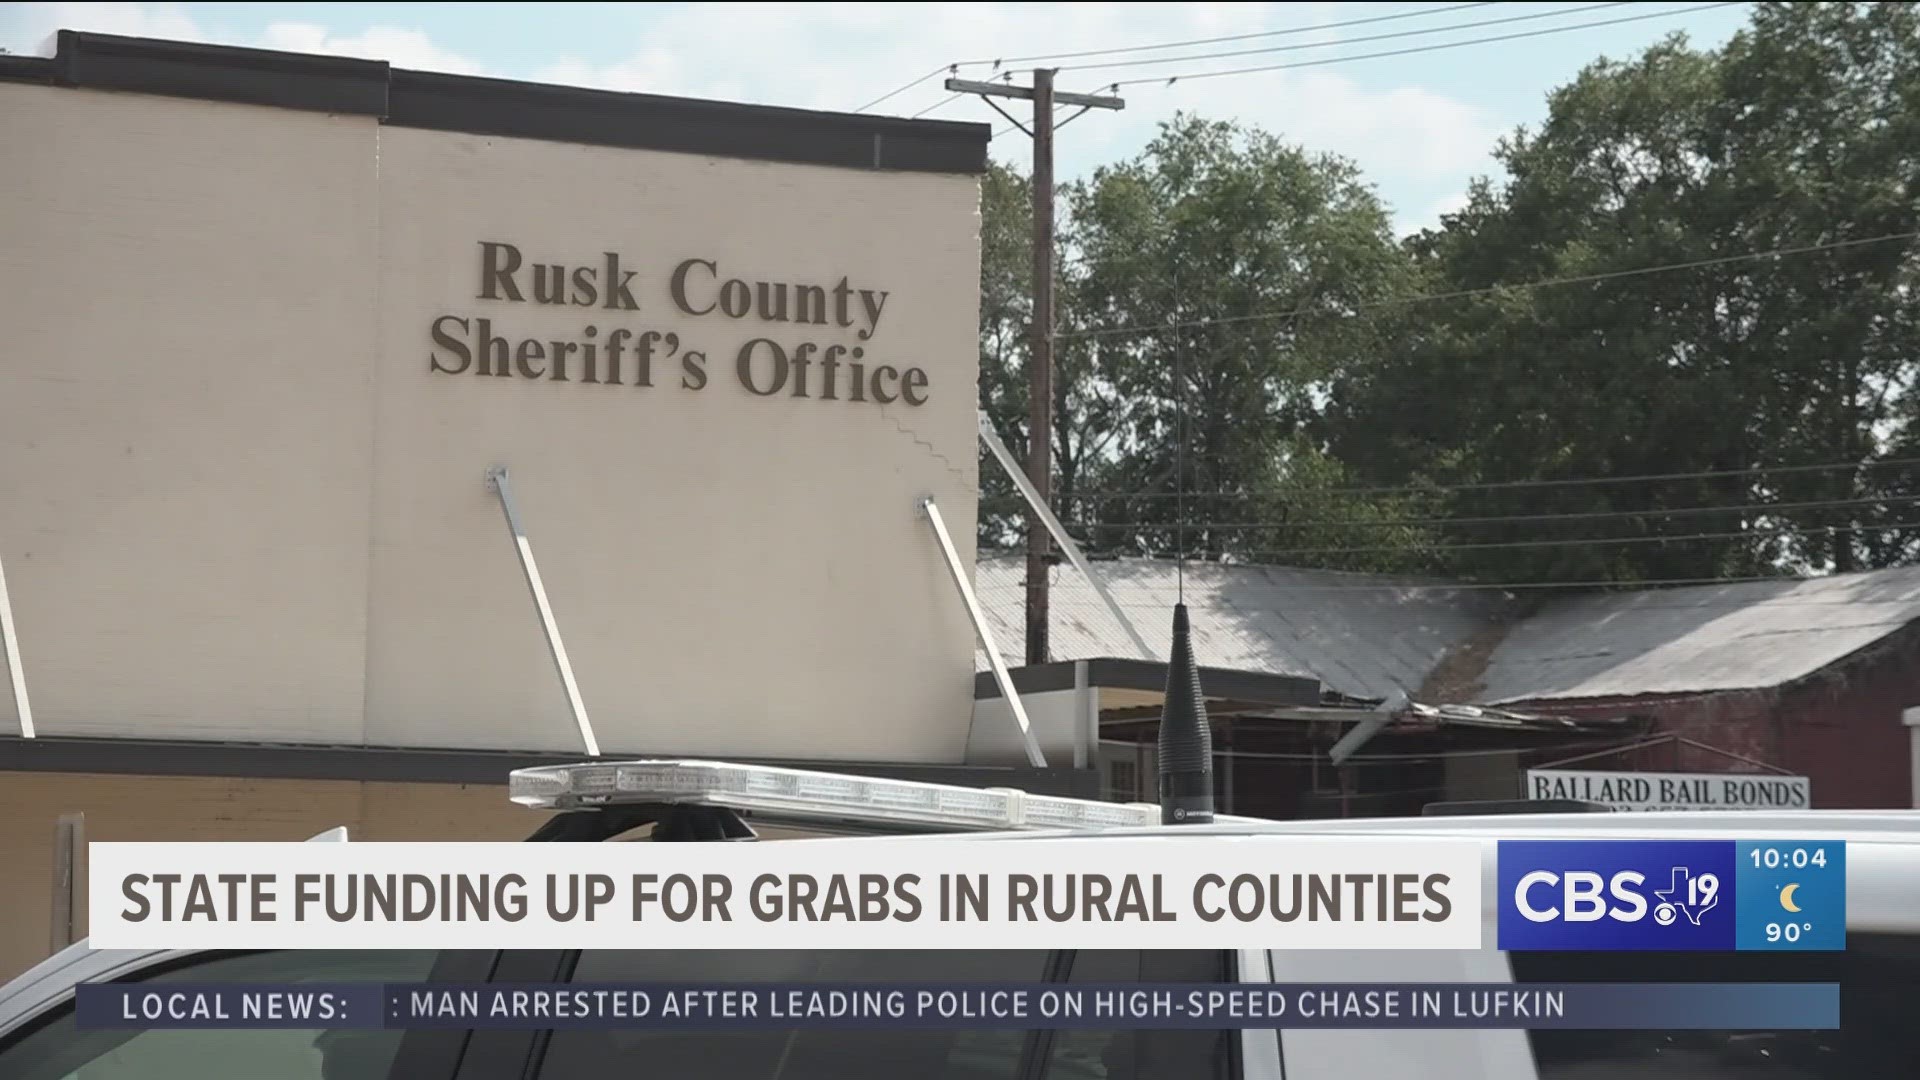 With the passing of Senate Bill 22 rural county sheriff's offices can soon apply for up to $500,000 in state grants depending on population size.